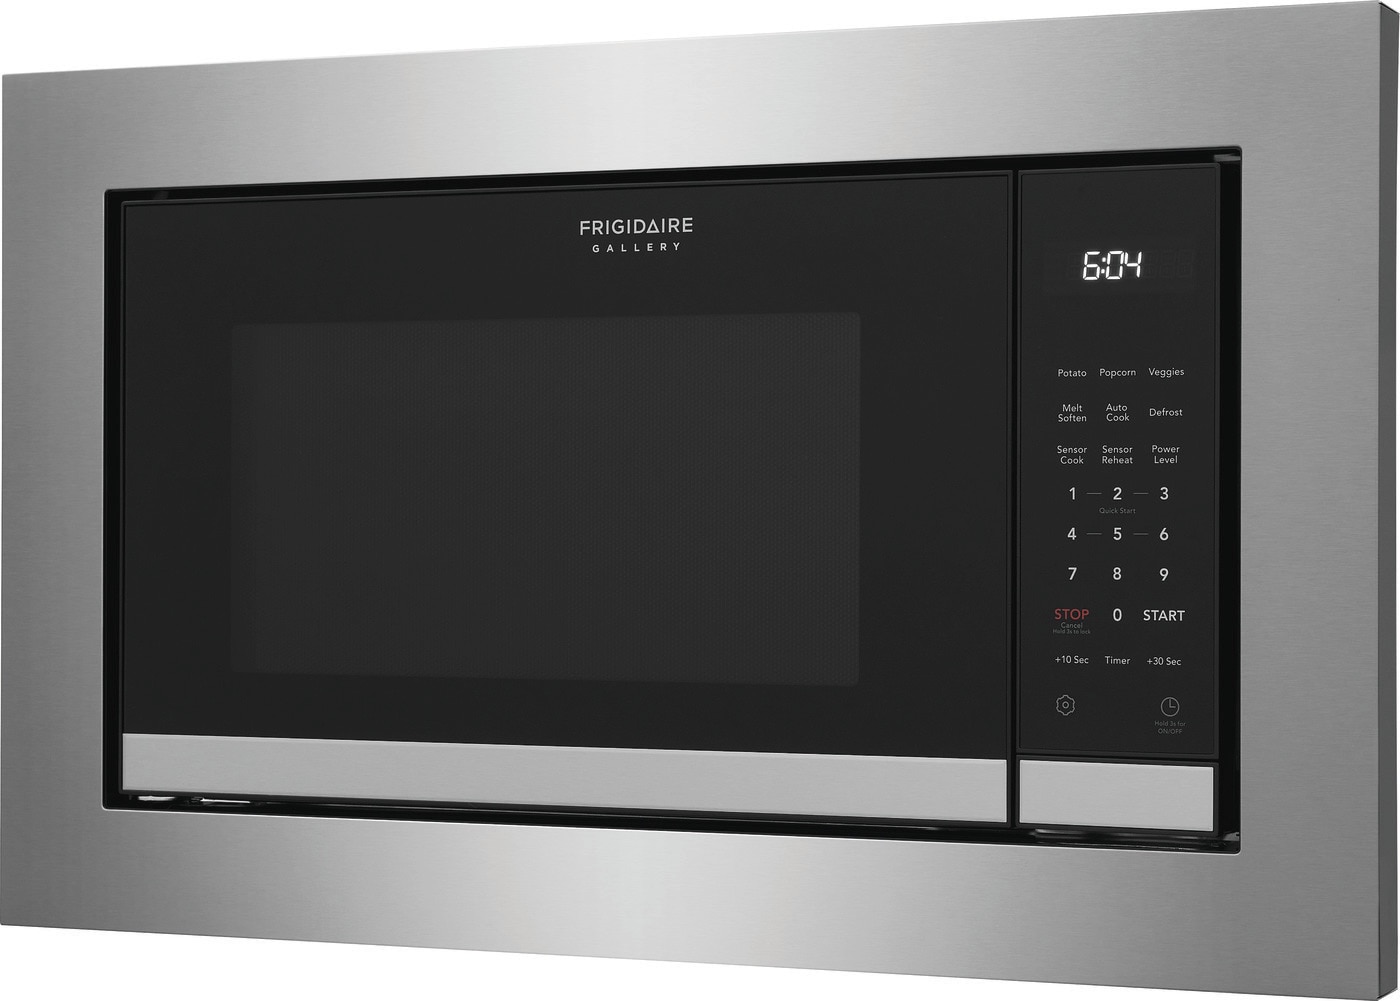 Frigidaire Gallery FGMO226NUF 2.2 cu. ft. Built-In Microwave